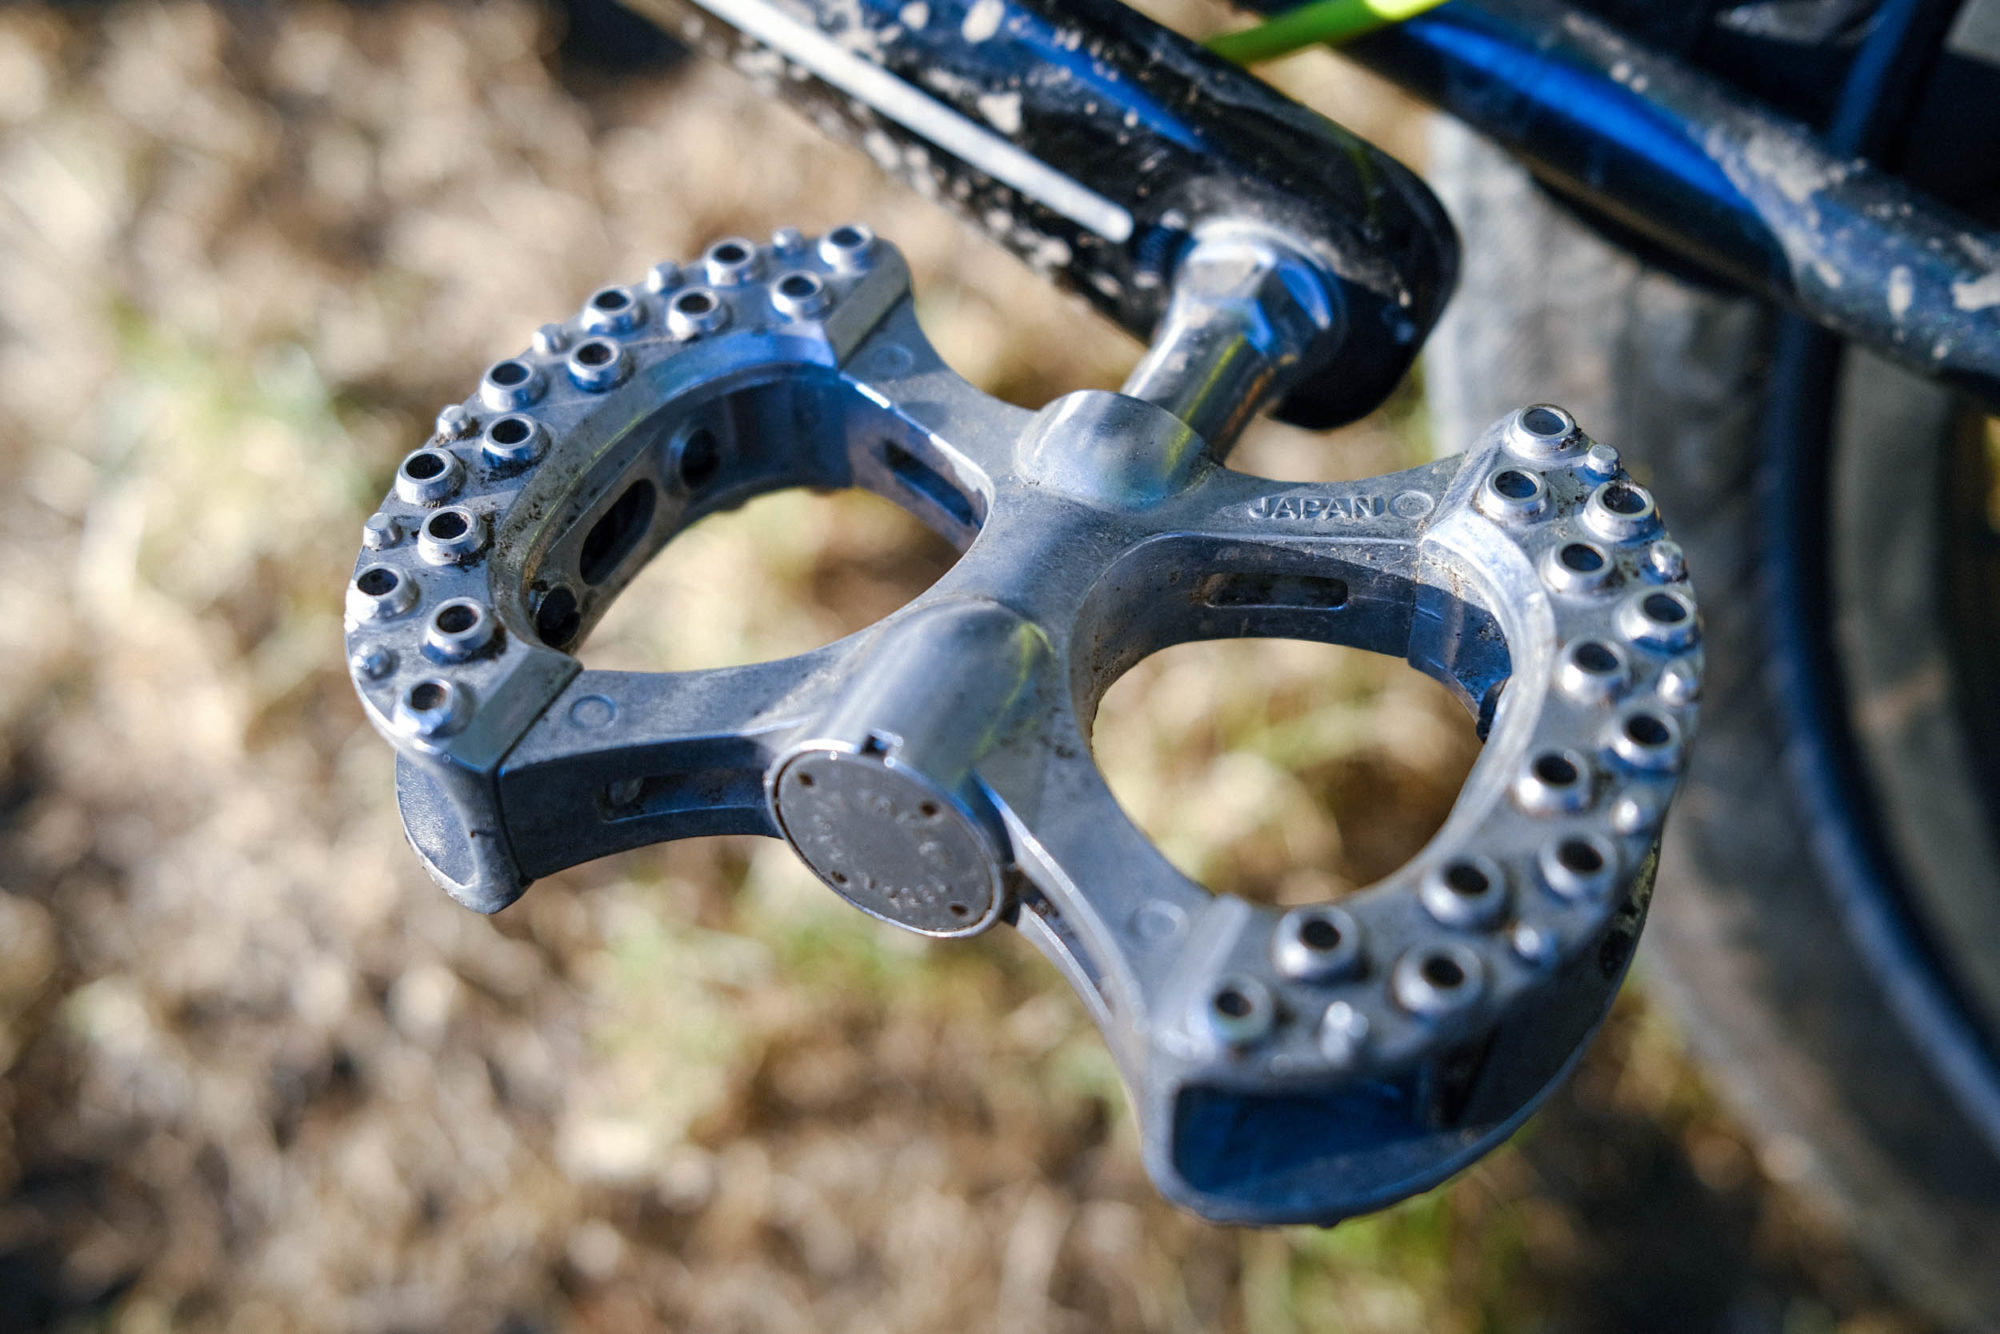 MKS Lambda Pedals, best pedals for bikepacking